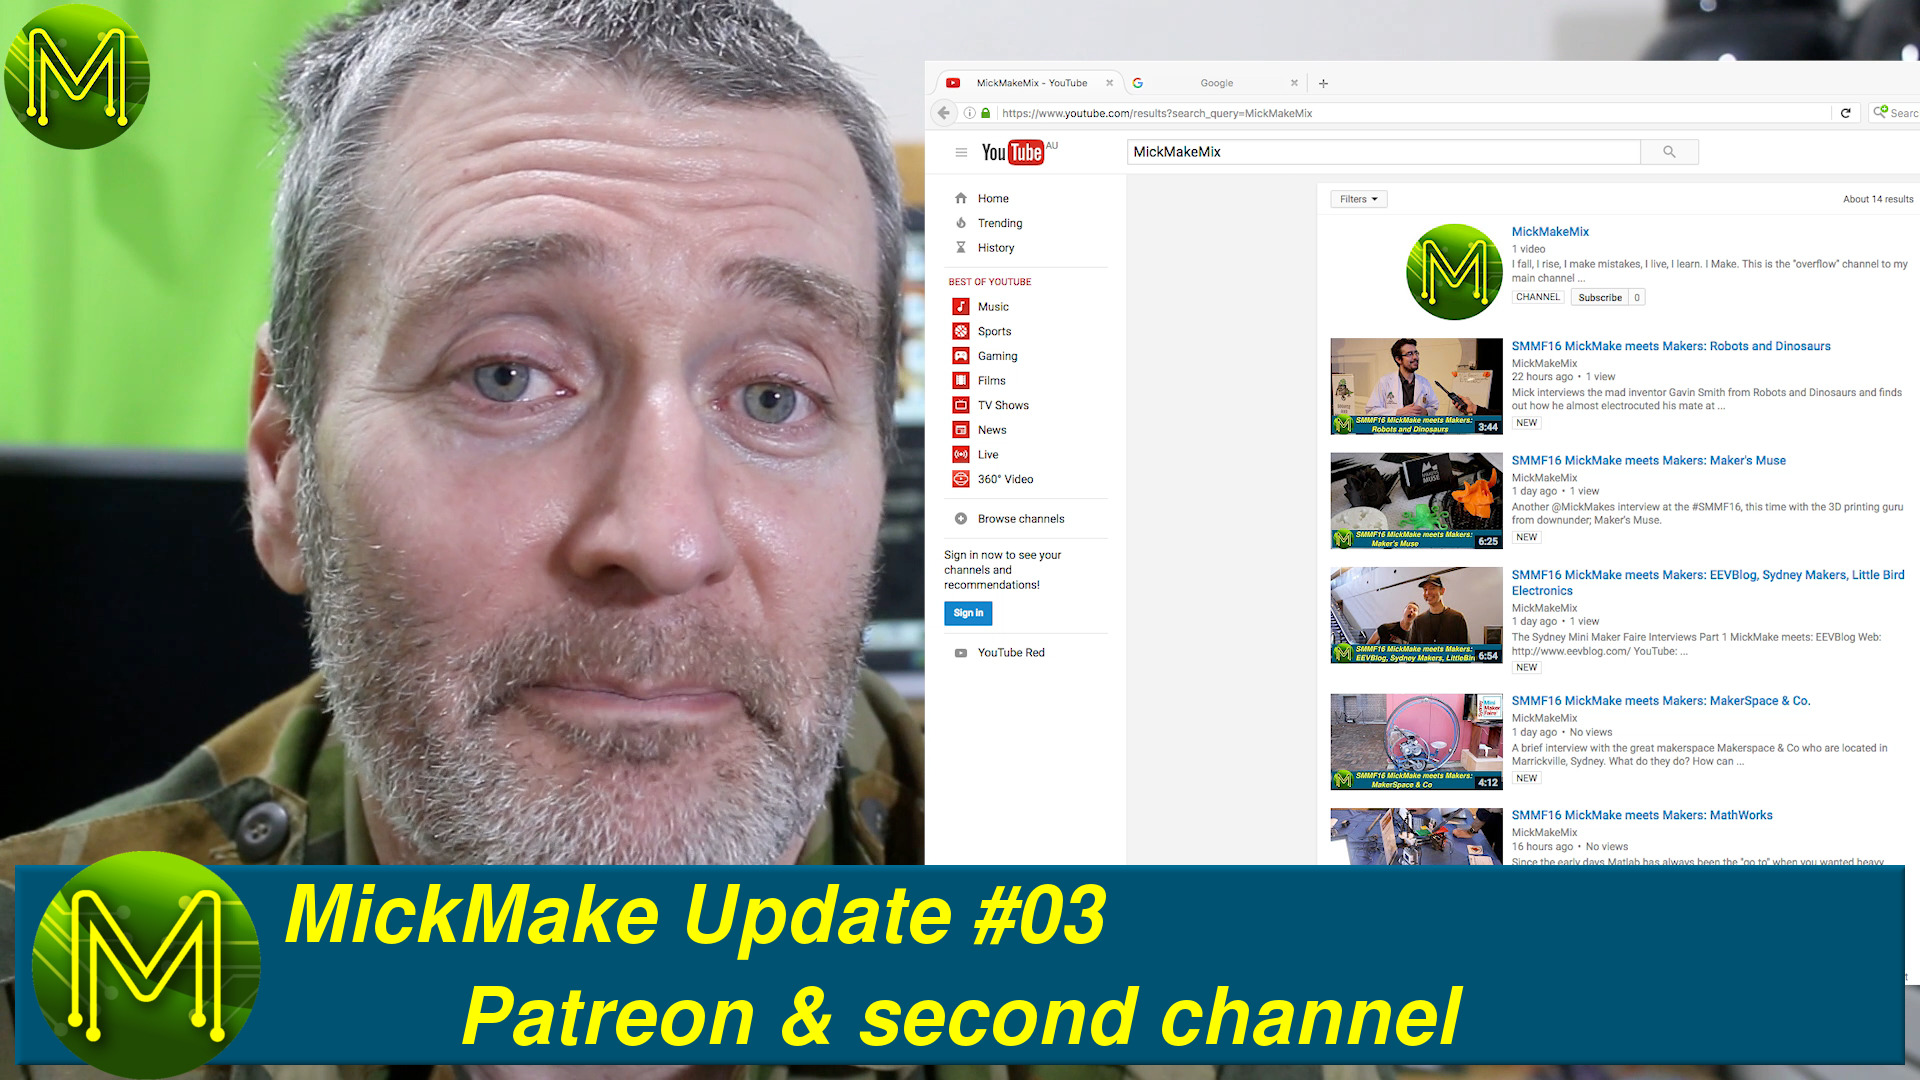 MickMake Update #03: Patreon & second channel